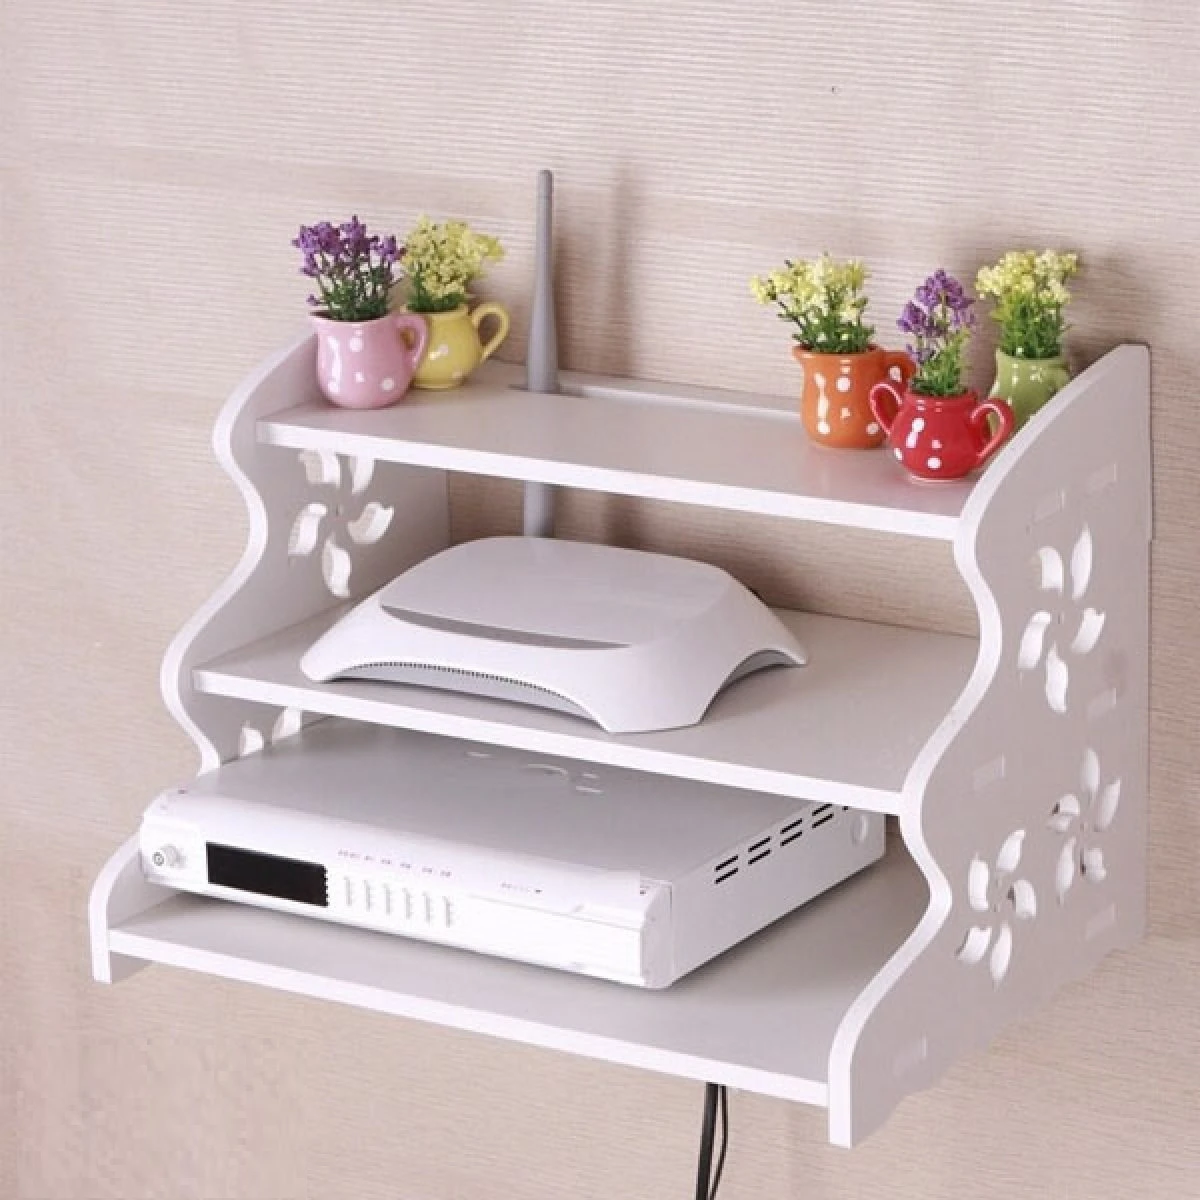 WiFi Router storage Stand Set Wall Floating Shelves Wall Mount Model big (3 layer)